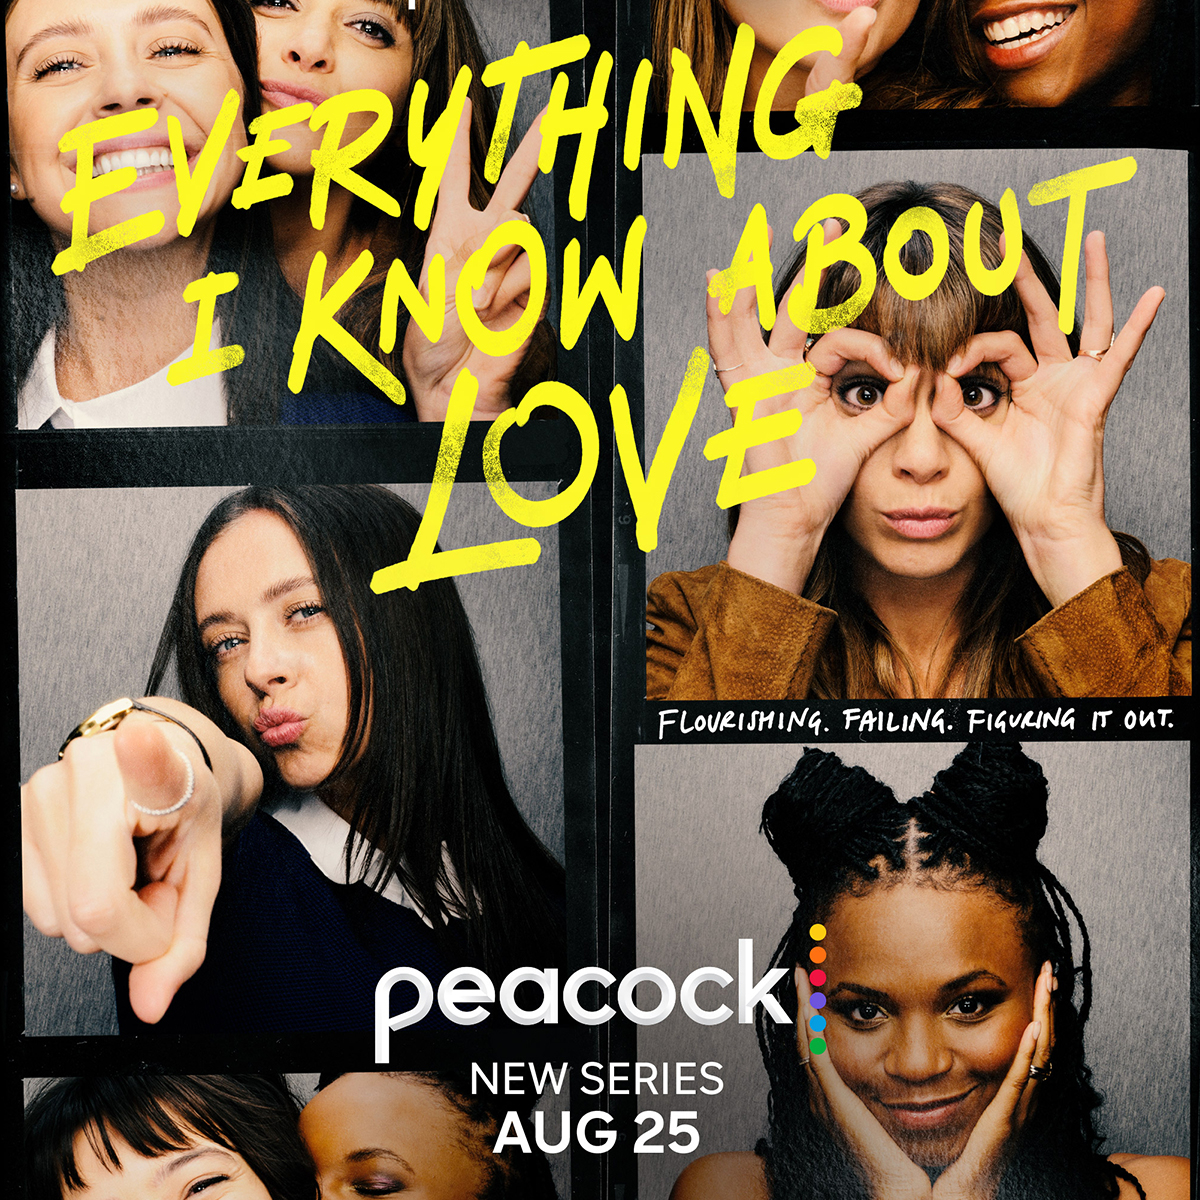 Made for Love Season 2: Everything You Need to Know About the New